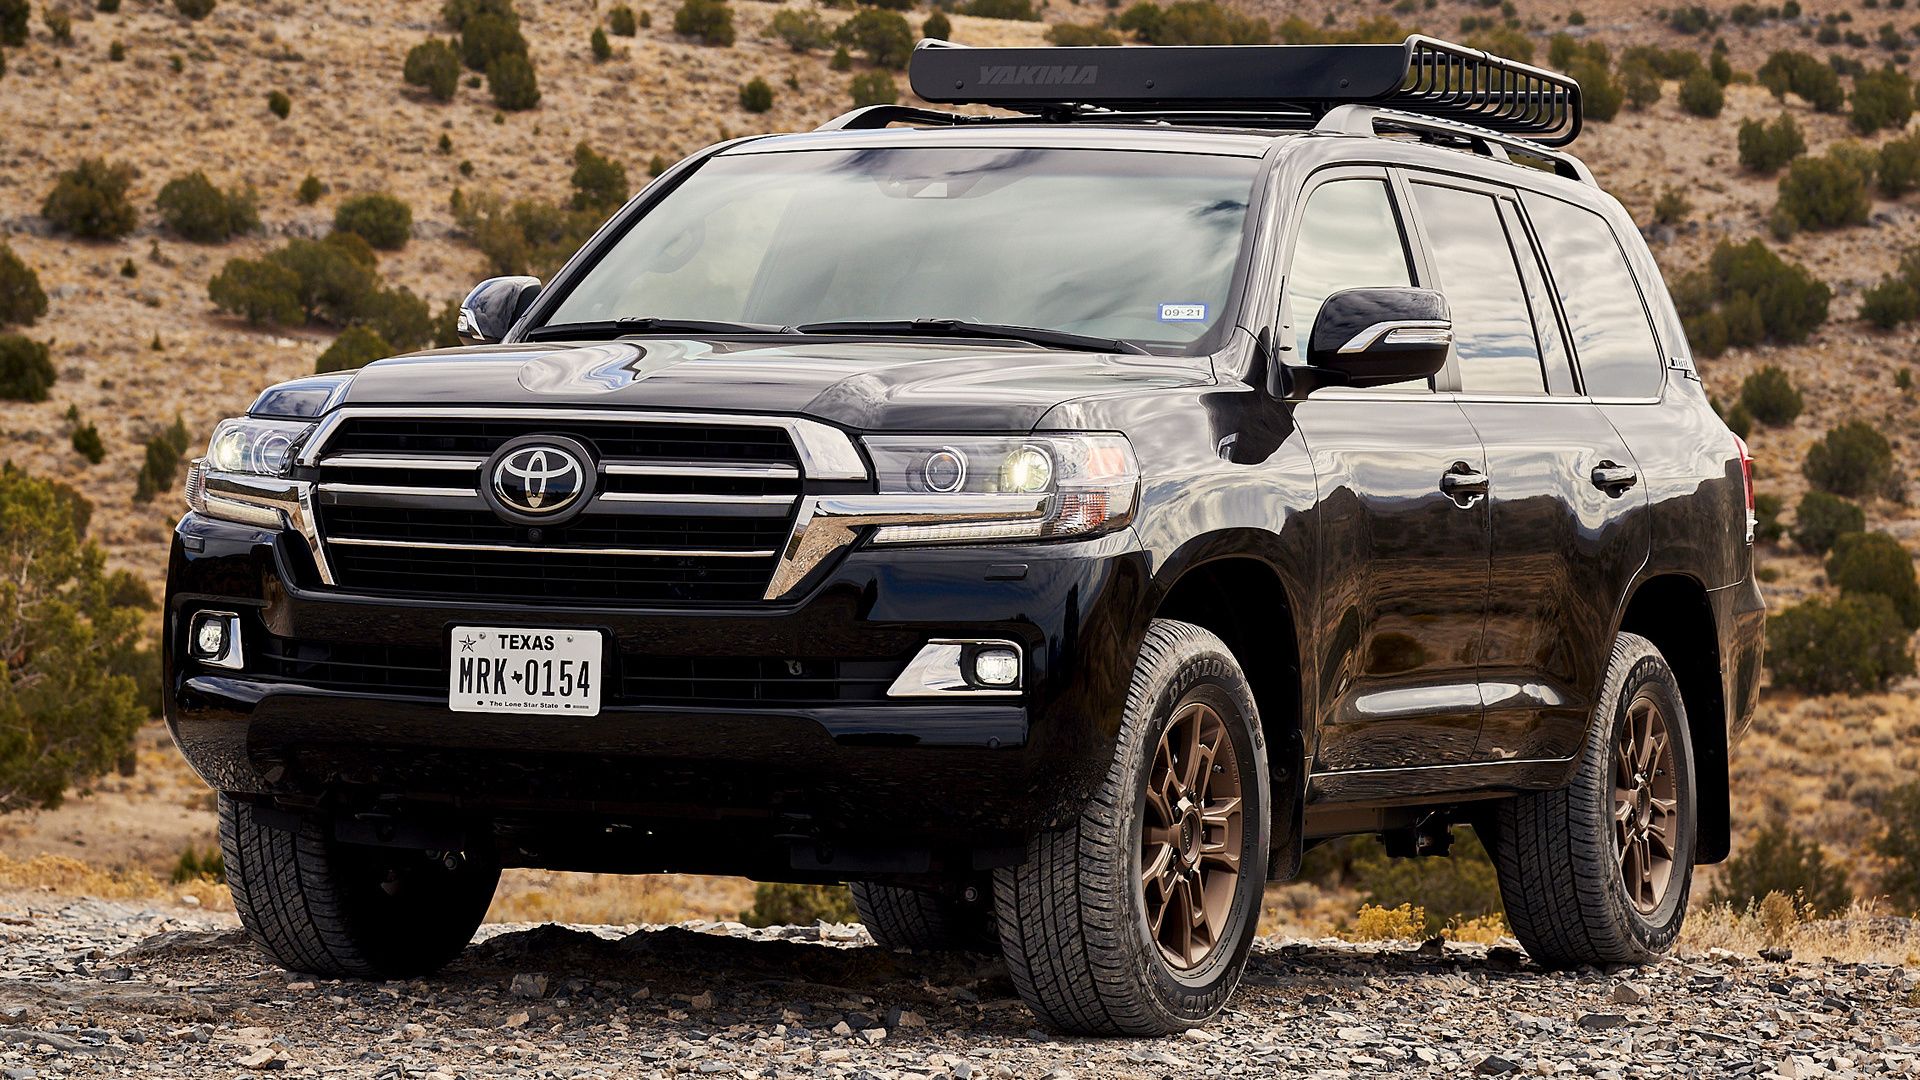 Toyota Land Cruiser Heritage Edition [200] (US) and HD Image